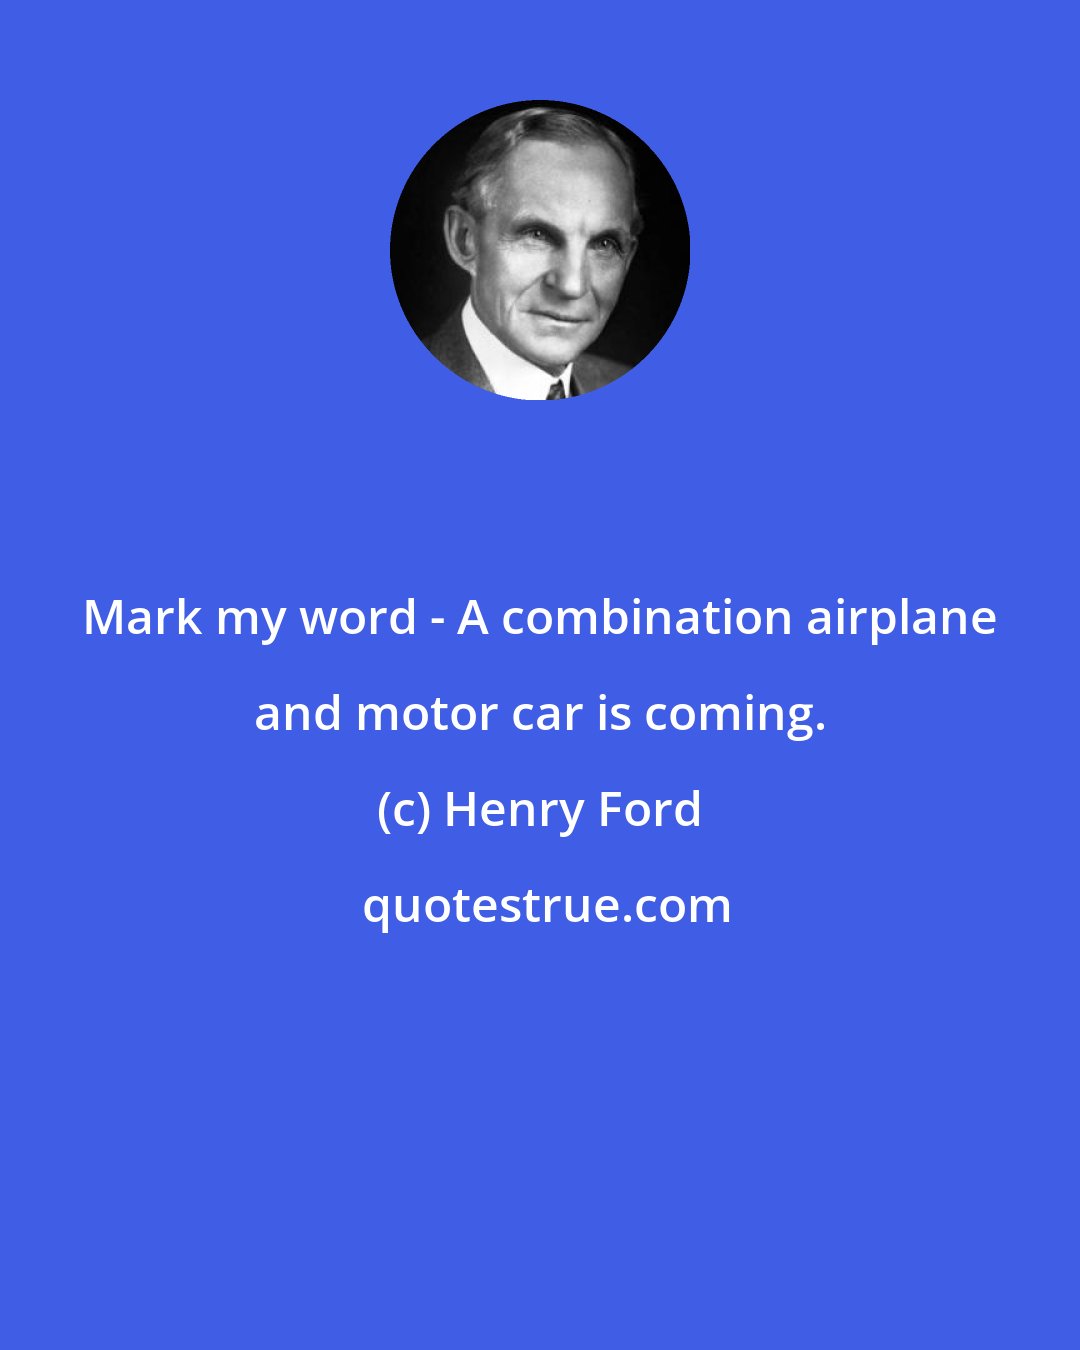 Henry Ford: Mark my word - A combination airplane and motor car is coming.